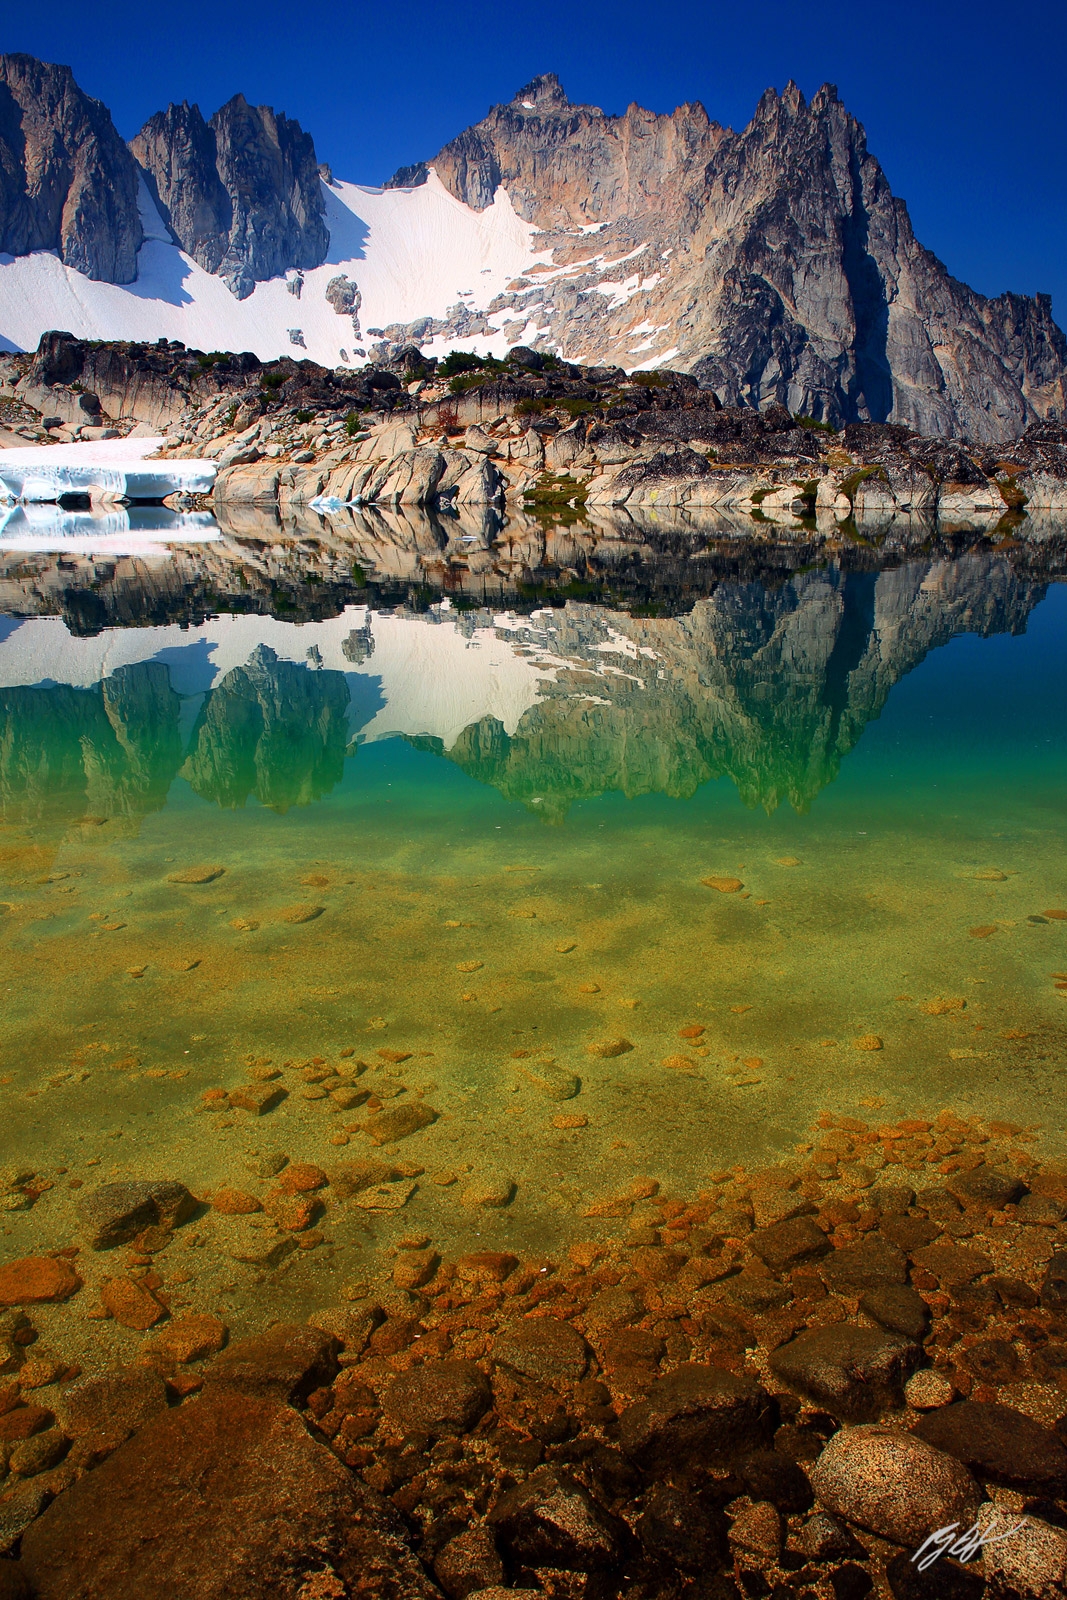 Dragontail Peak Reflected in Tranquil Lake in the Upper Enchantments in the Alpine Lakes Wilderness in Washington